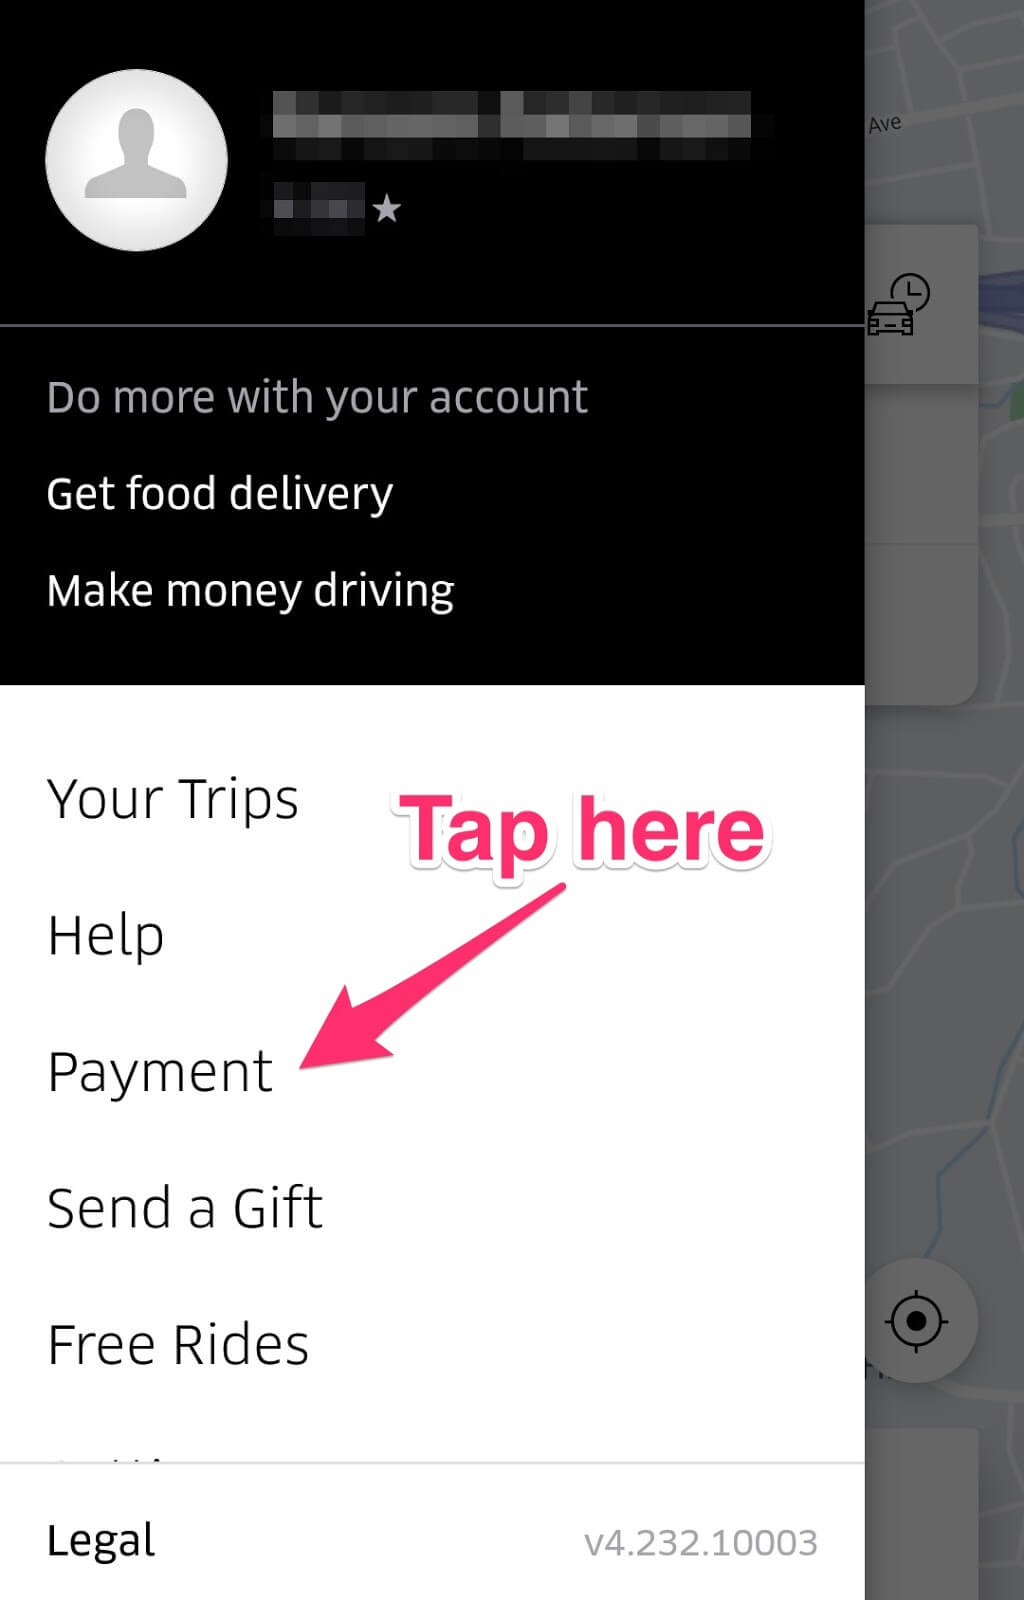 How to Remove Your Credit Card from Uber: tap payments